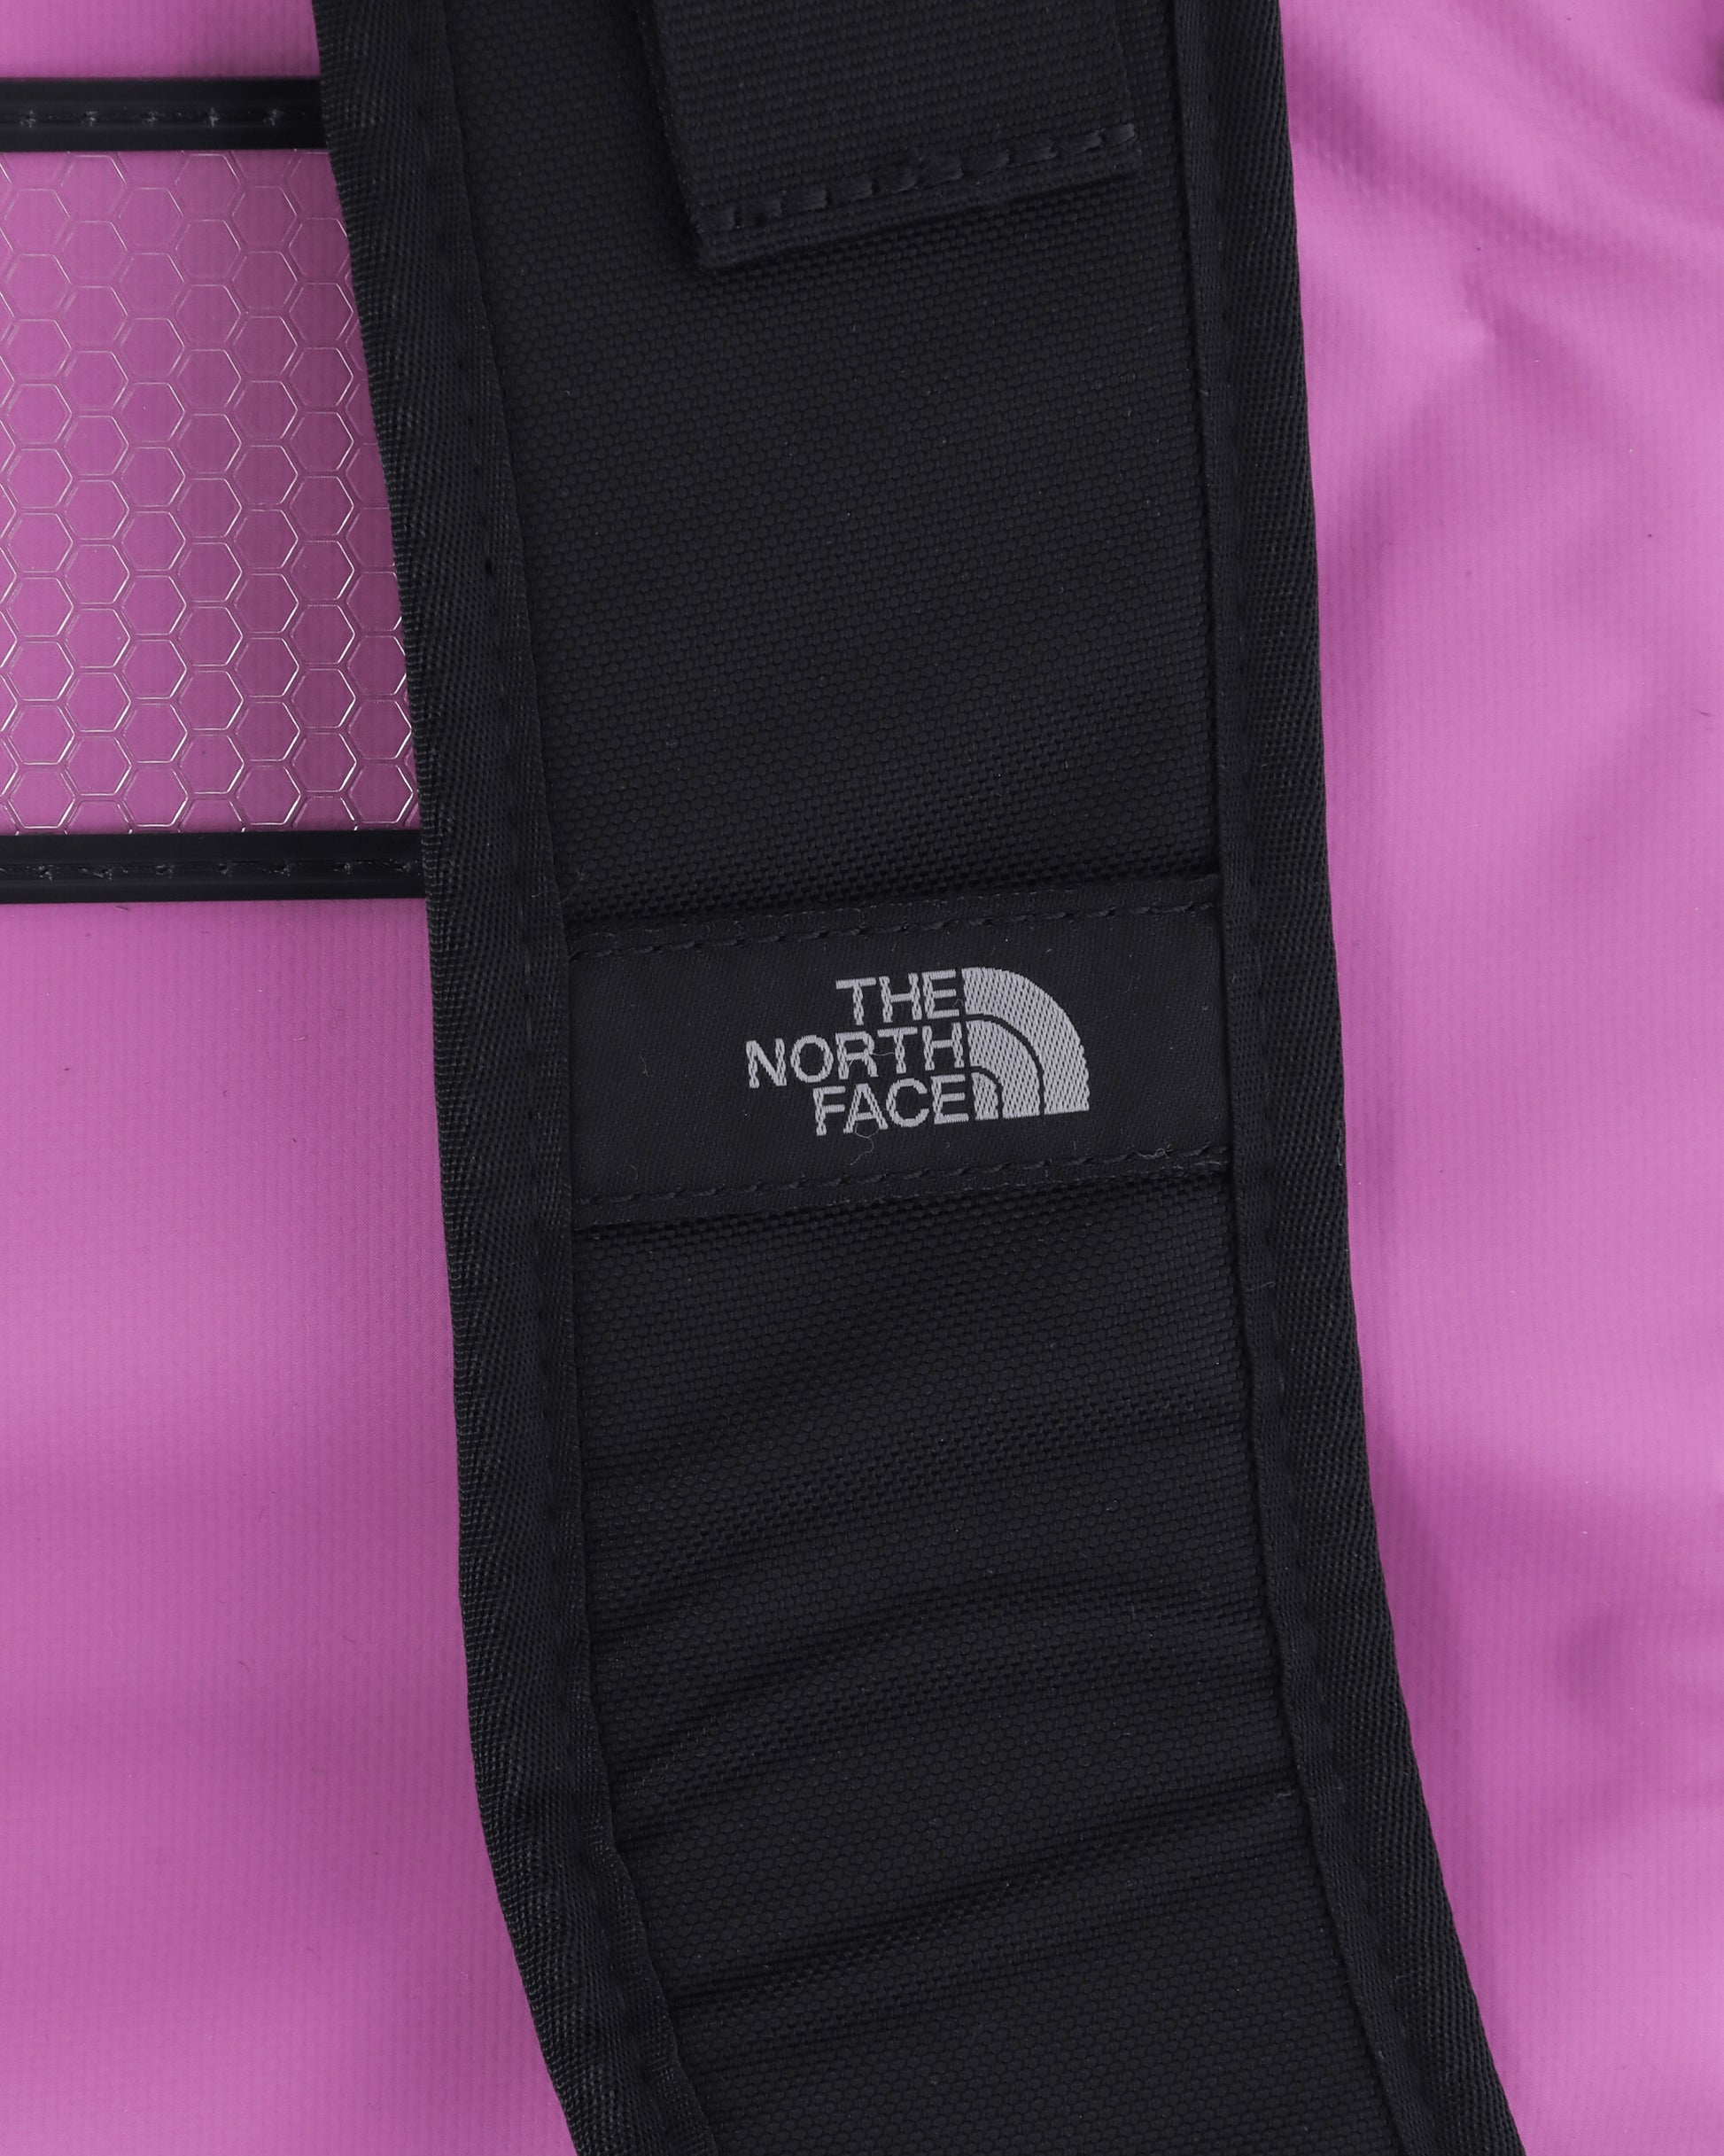 The North Face Base Camp Duffel - S Wisteria Purple/Tnf Black Bags and Backpacks Travel Bags NF0A52ST 8H81